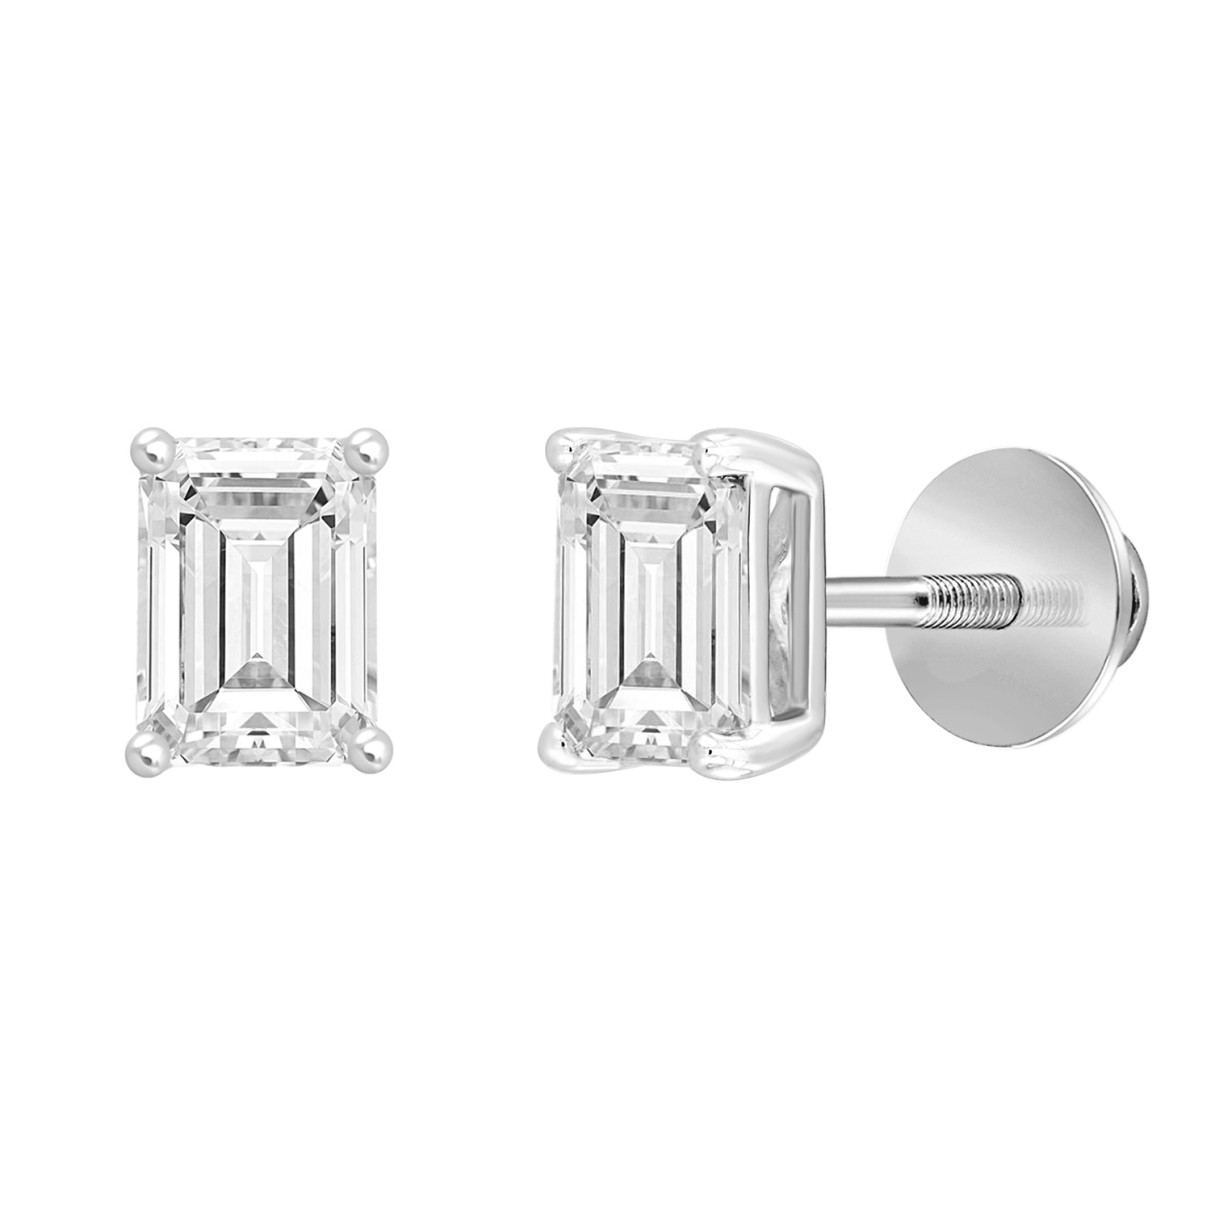 LADIES SOLITAIRE EARRINGS 1 1/2CT EMERALD DIAMOND 14K WHITE GOLD